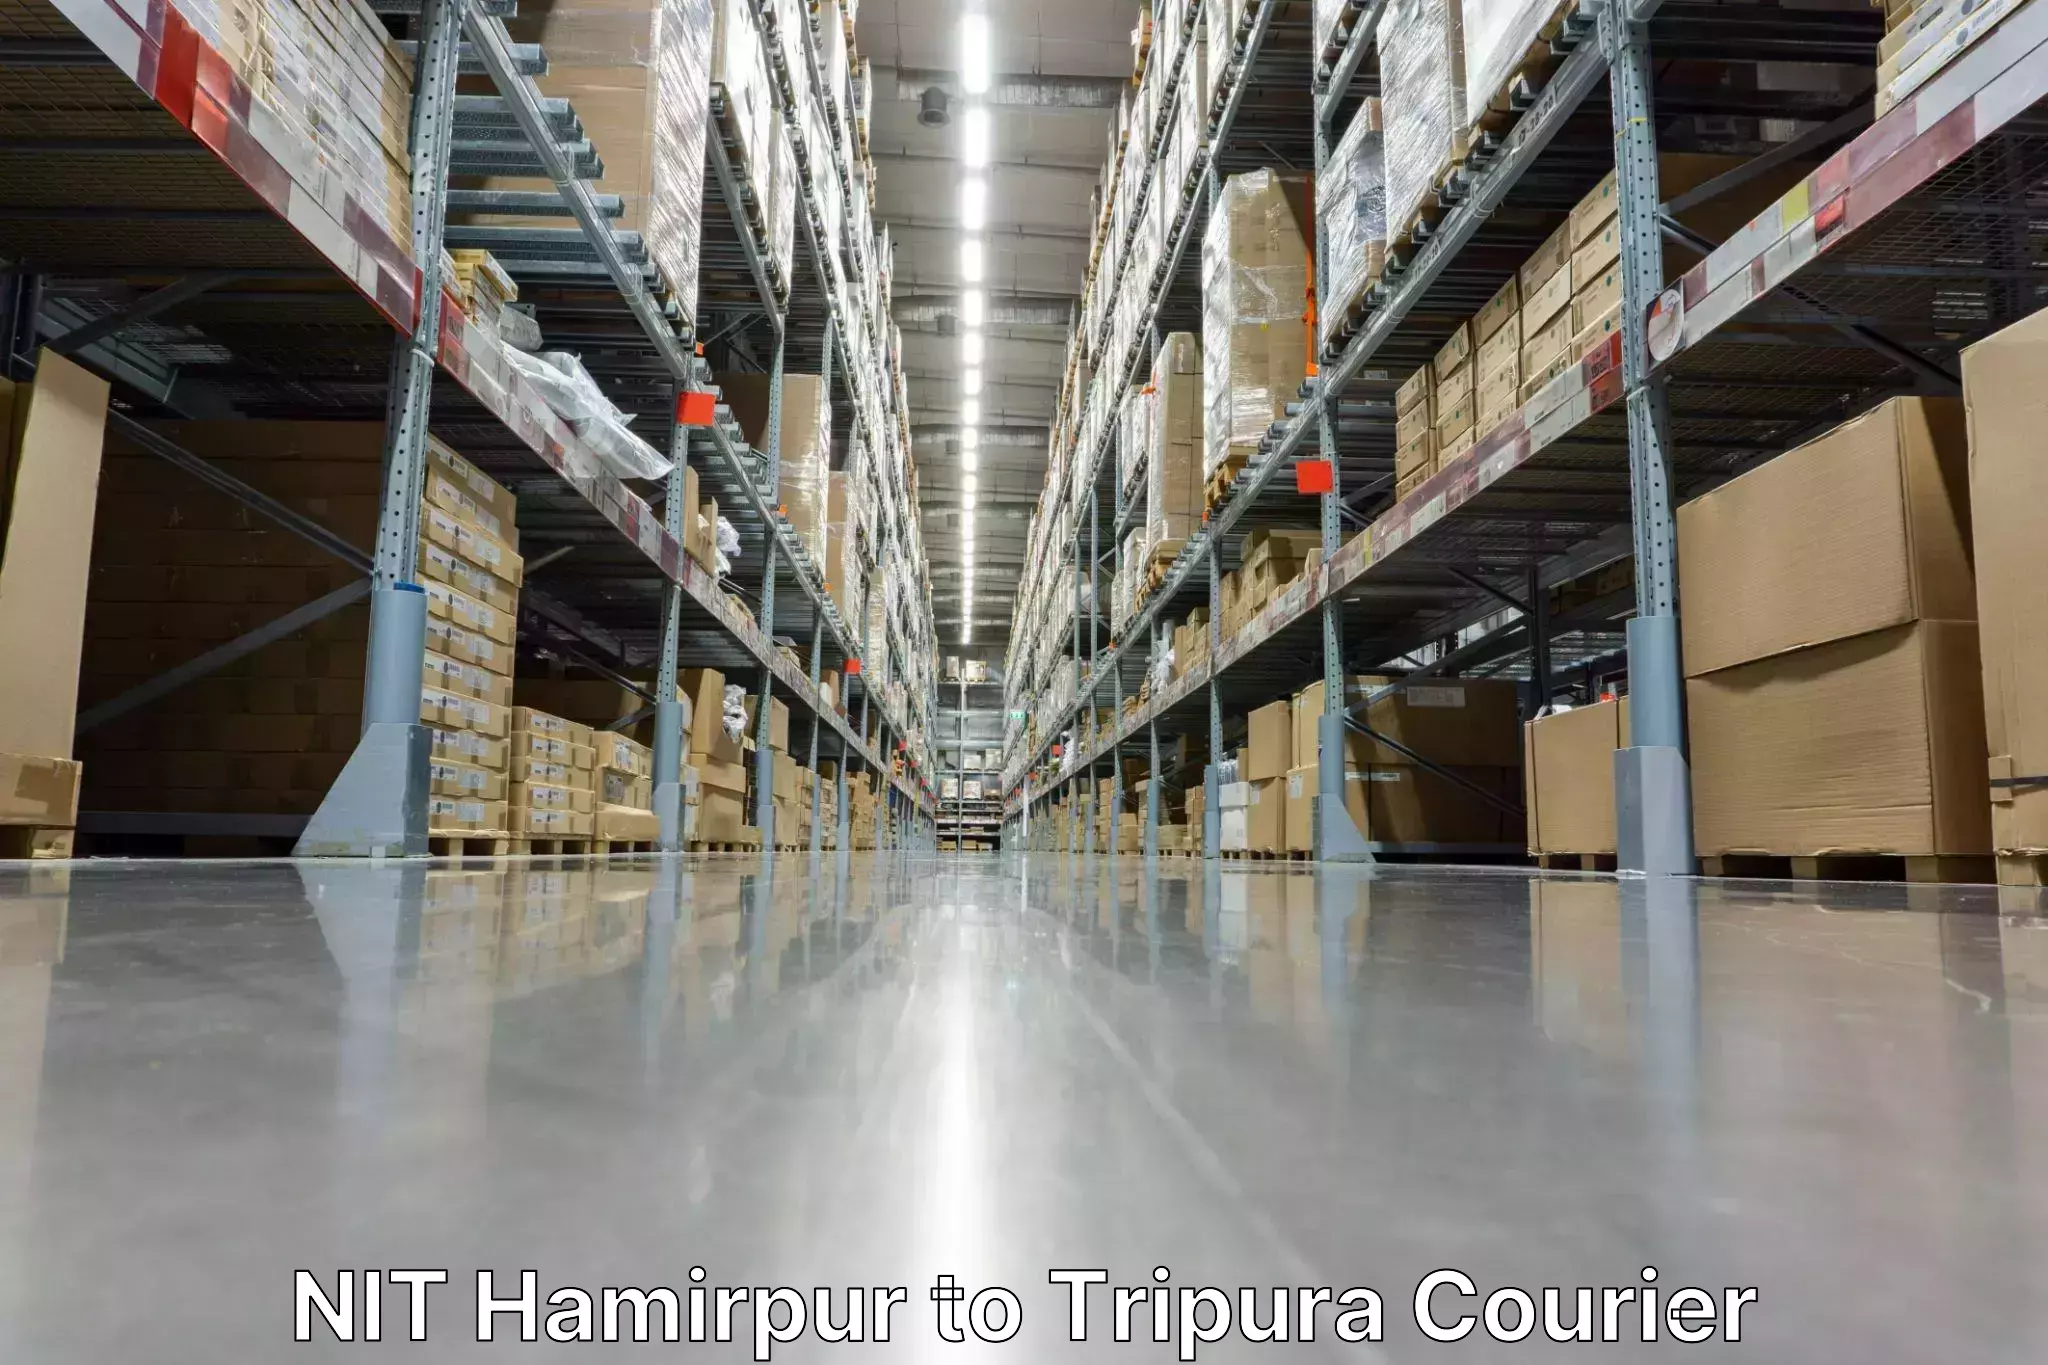 State-of-the-art courier technology NIT Hamirpur to Agartala